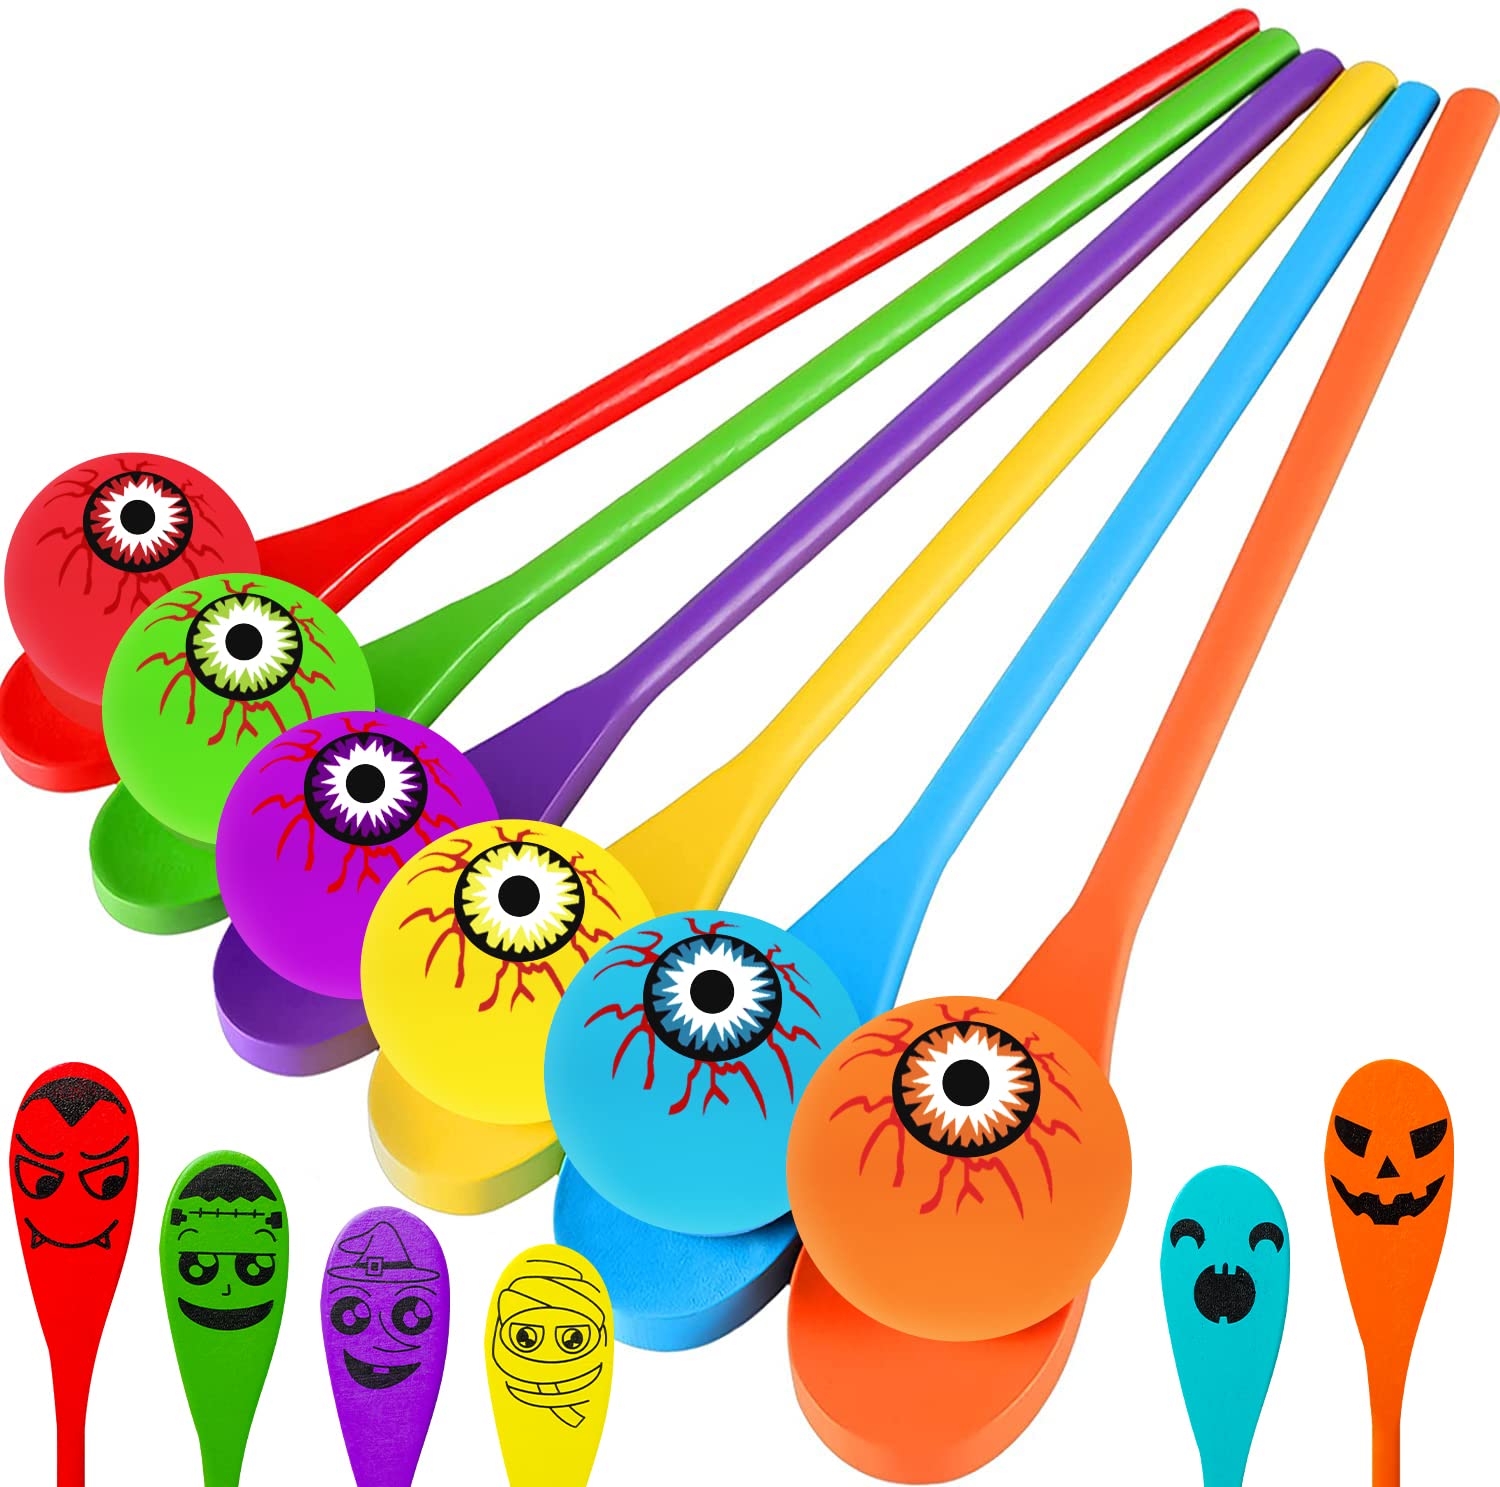 Halloween Egg and Spoon Race Game Set - Halloween Party Favors- 6 Eyeballs and Spoons with Assorted Colors for Kids and Adults Halloween Indoor Outdoor Fun Games, Party Supplies, Classroom Activities